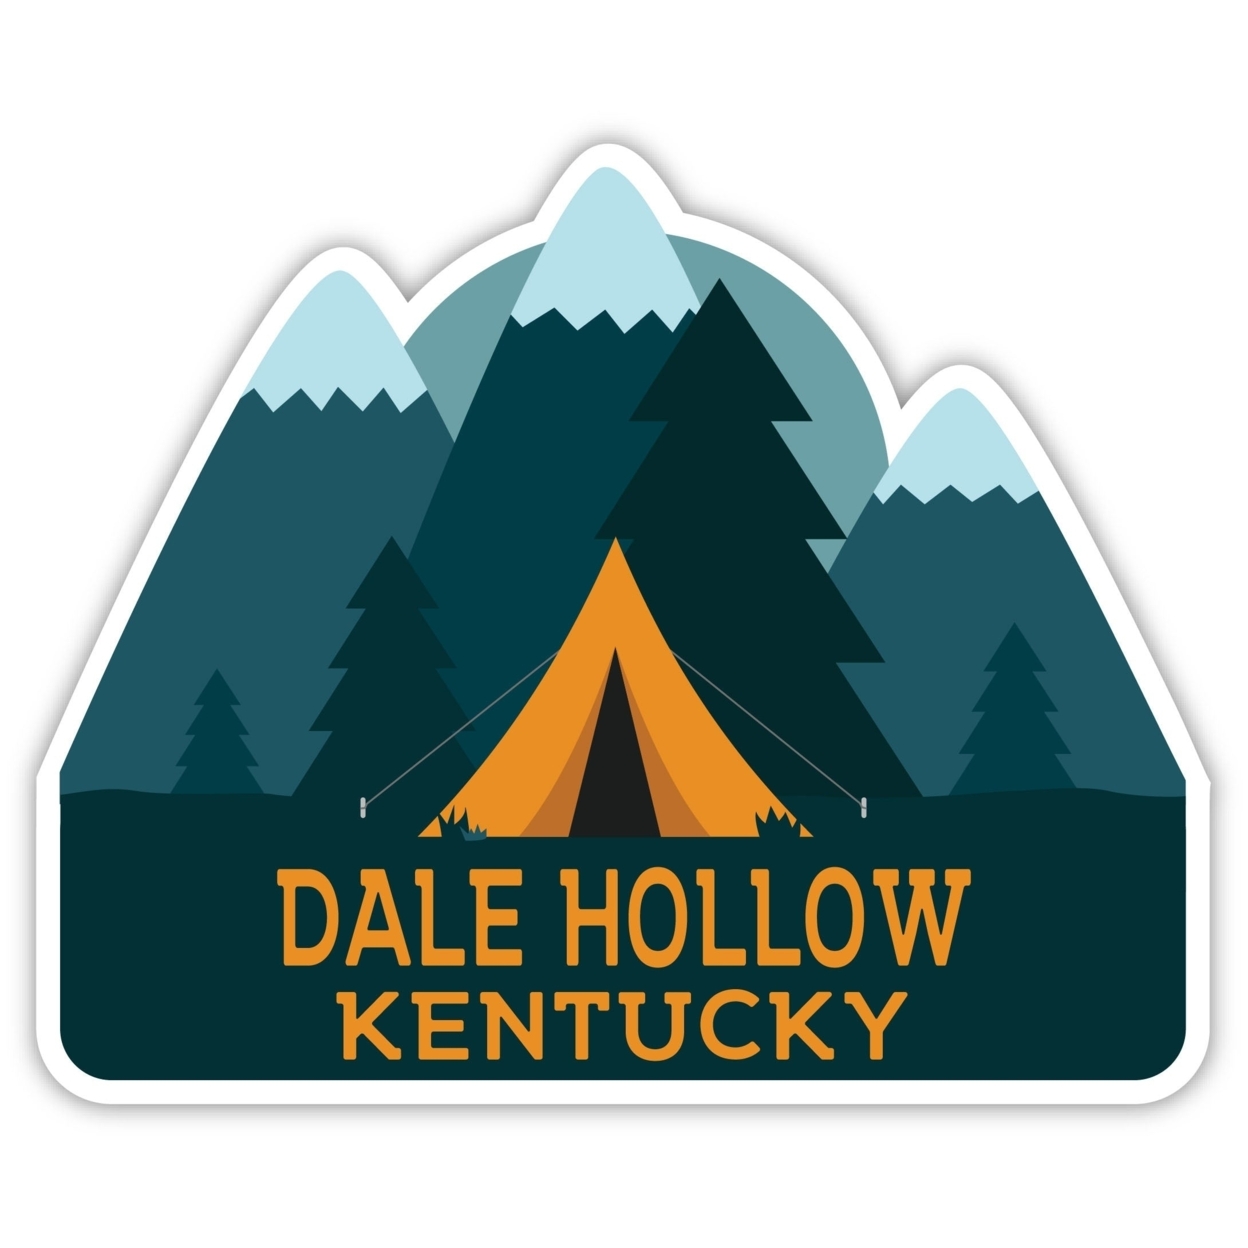 Dale Hollow Kentucky Souvenir Decorative Stickers (Choose Theme And Size) - 4-Pack, 6-Inch, Tent